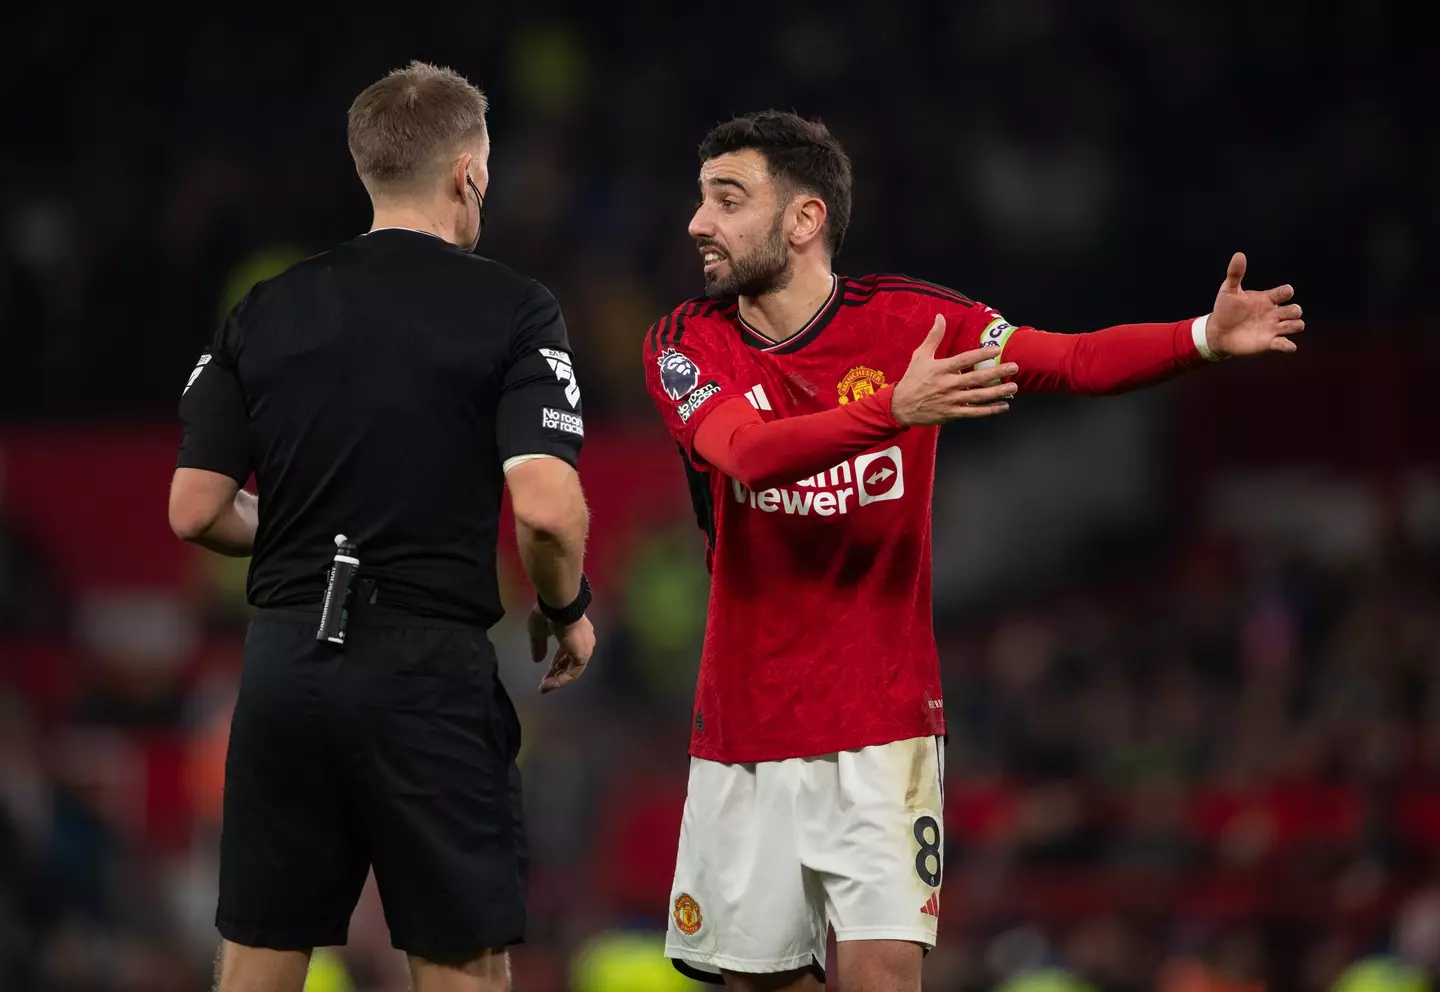 Premier League referees are some of the highest paid in the world. Image: Getty 